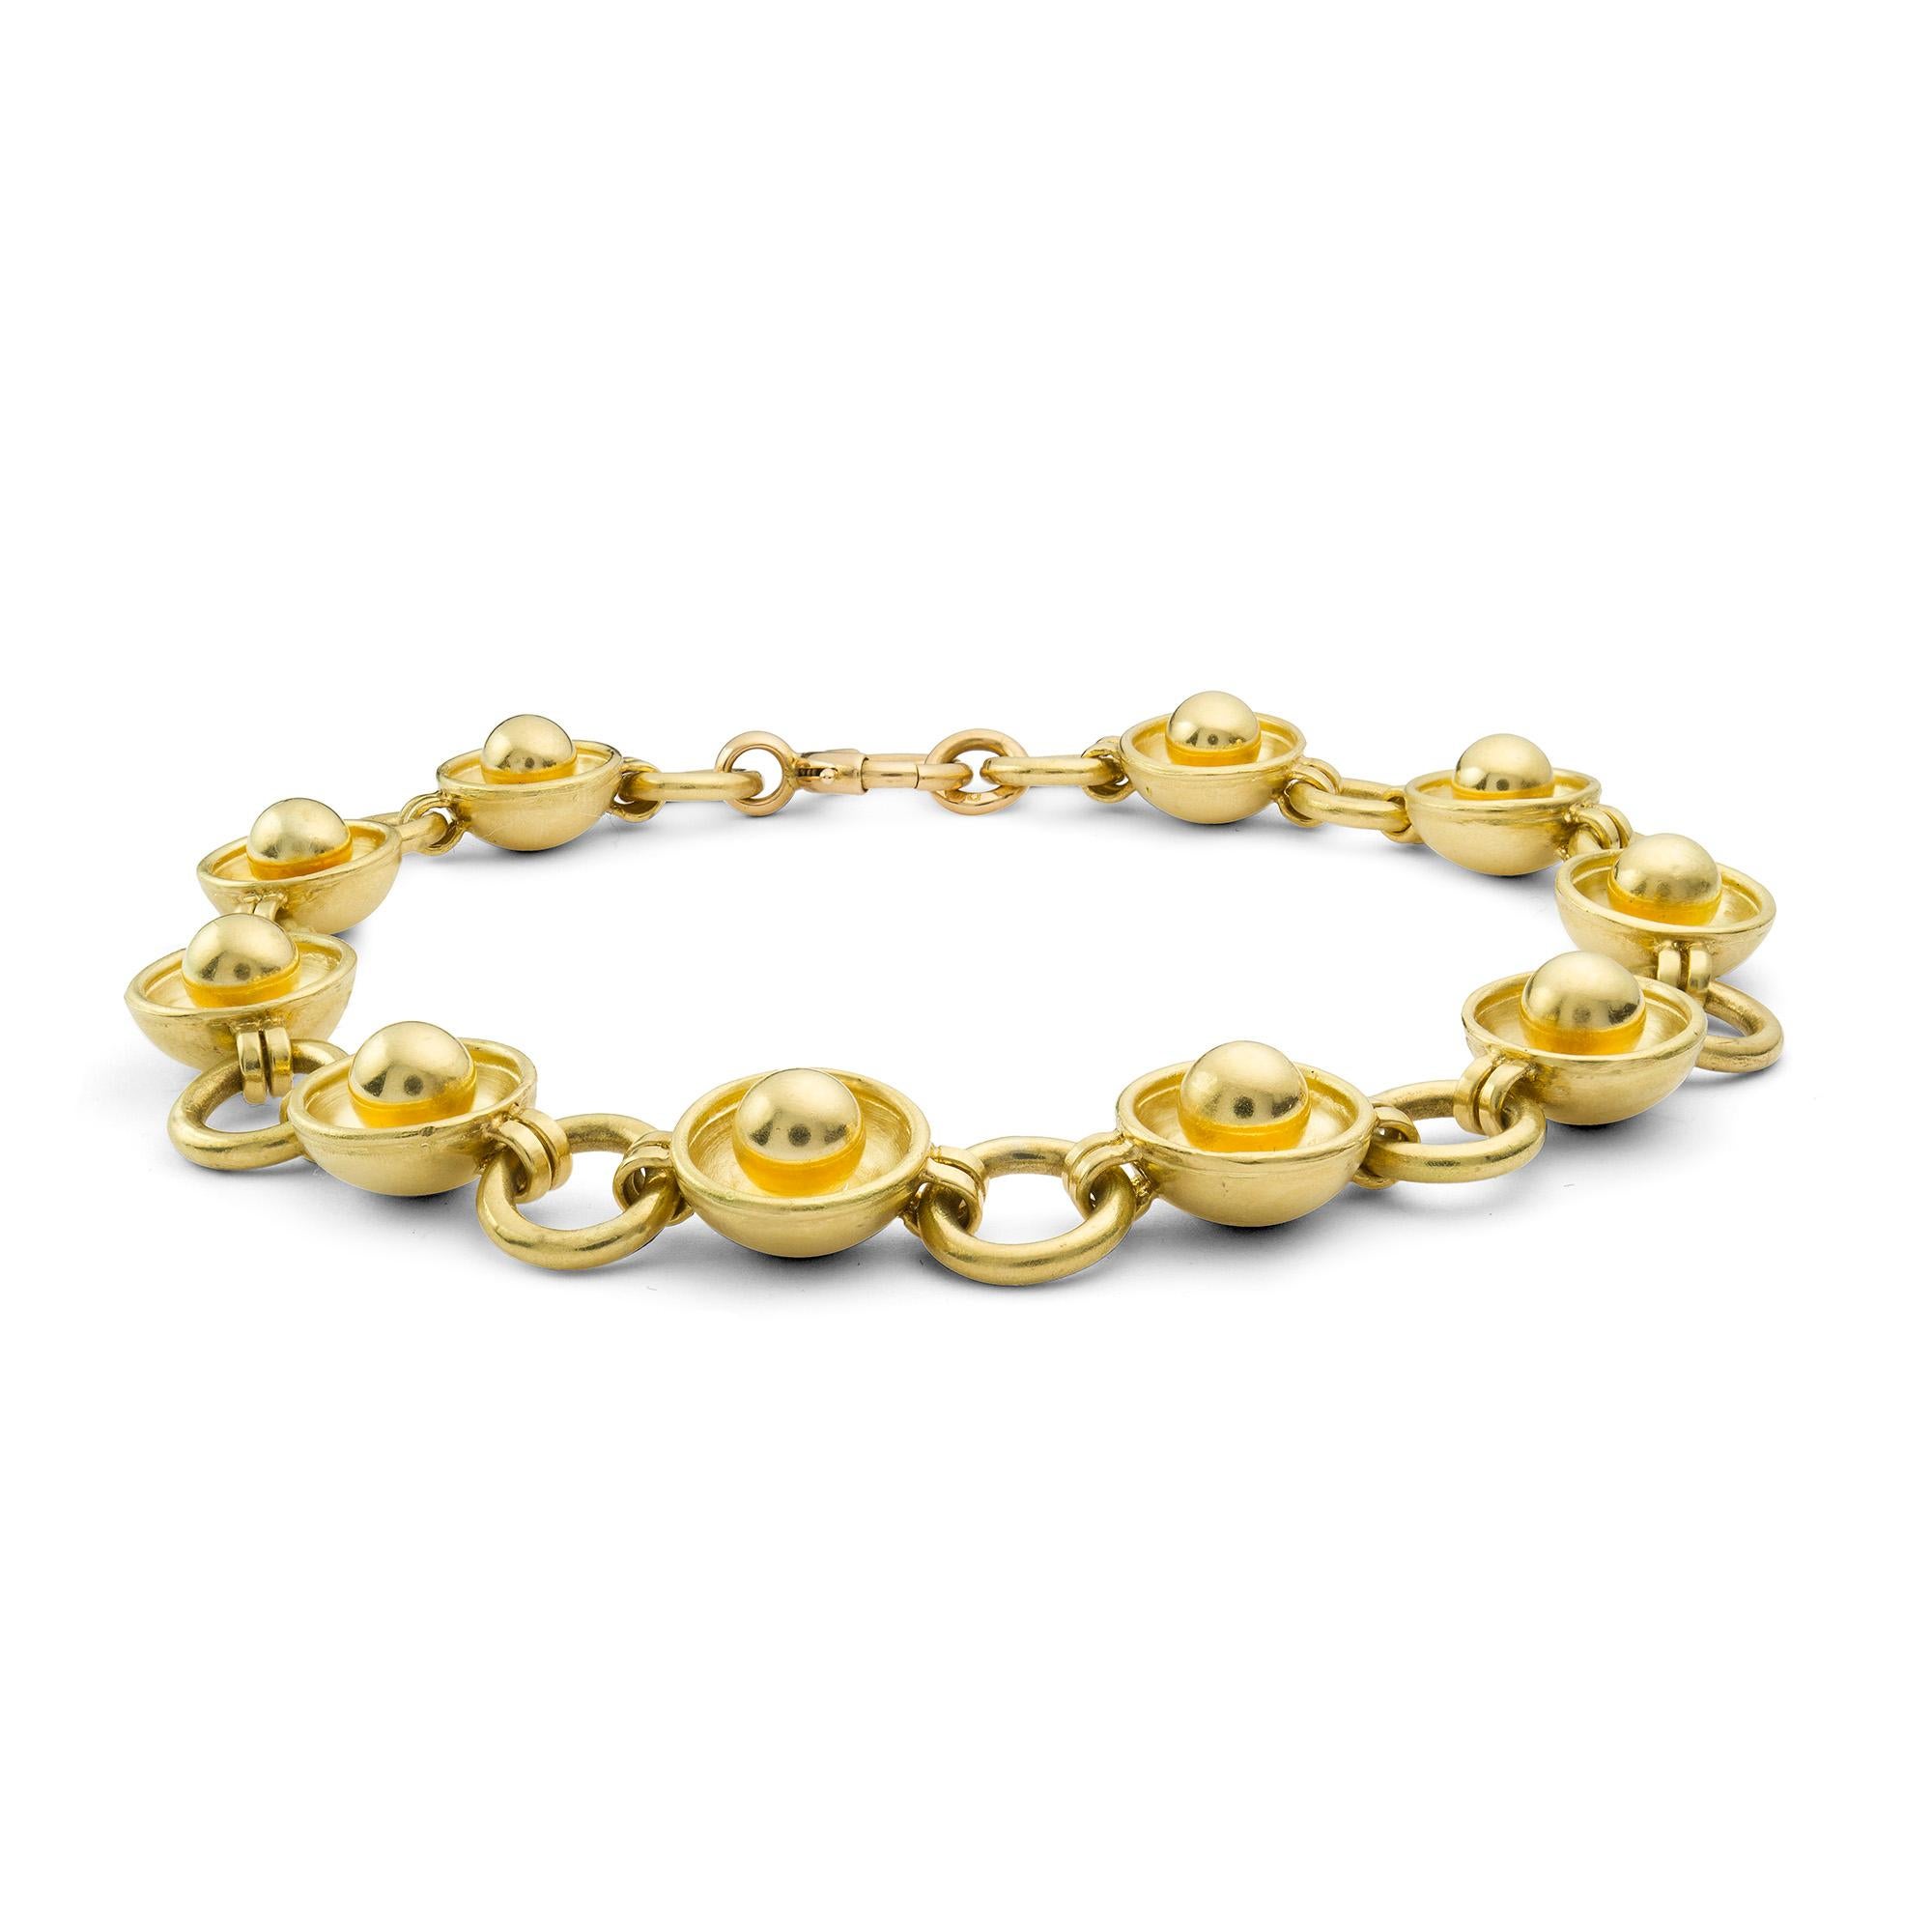 A gold link bracelet, designed as circular gold cups with centre gold ball link alternating to an open ring link, all in 18ct yellow gold, hallmarked 18ct gold, London 2015, made by Bentley and Skinner sponsor mark, measuring approximately 23cm in